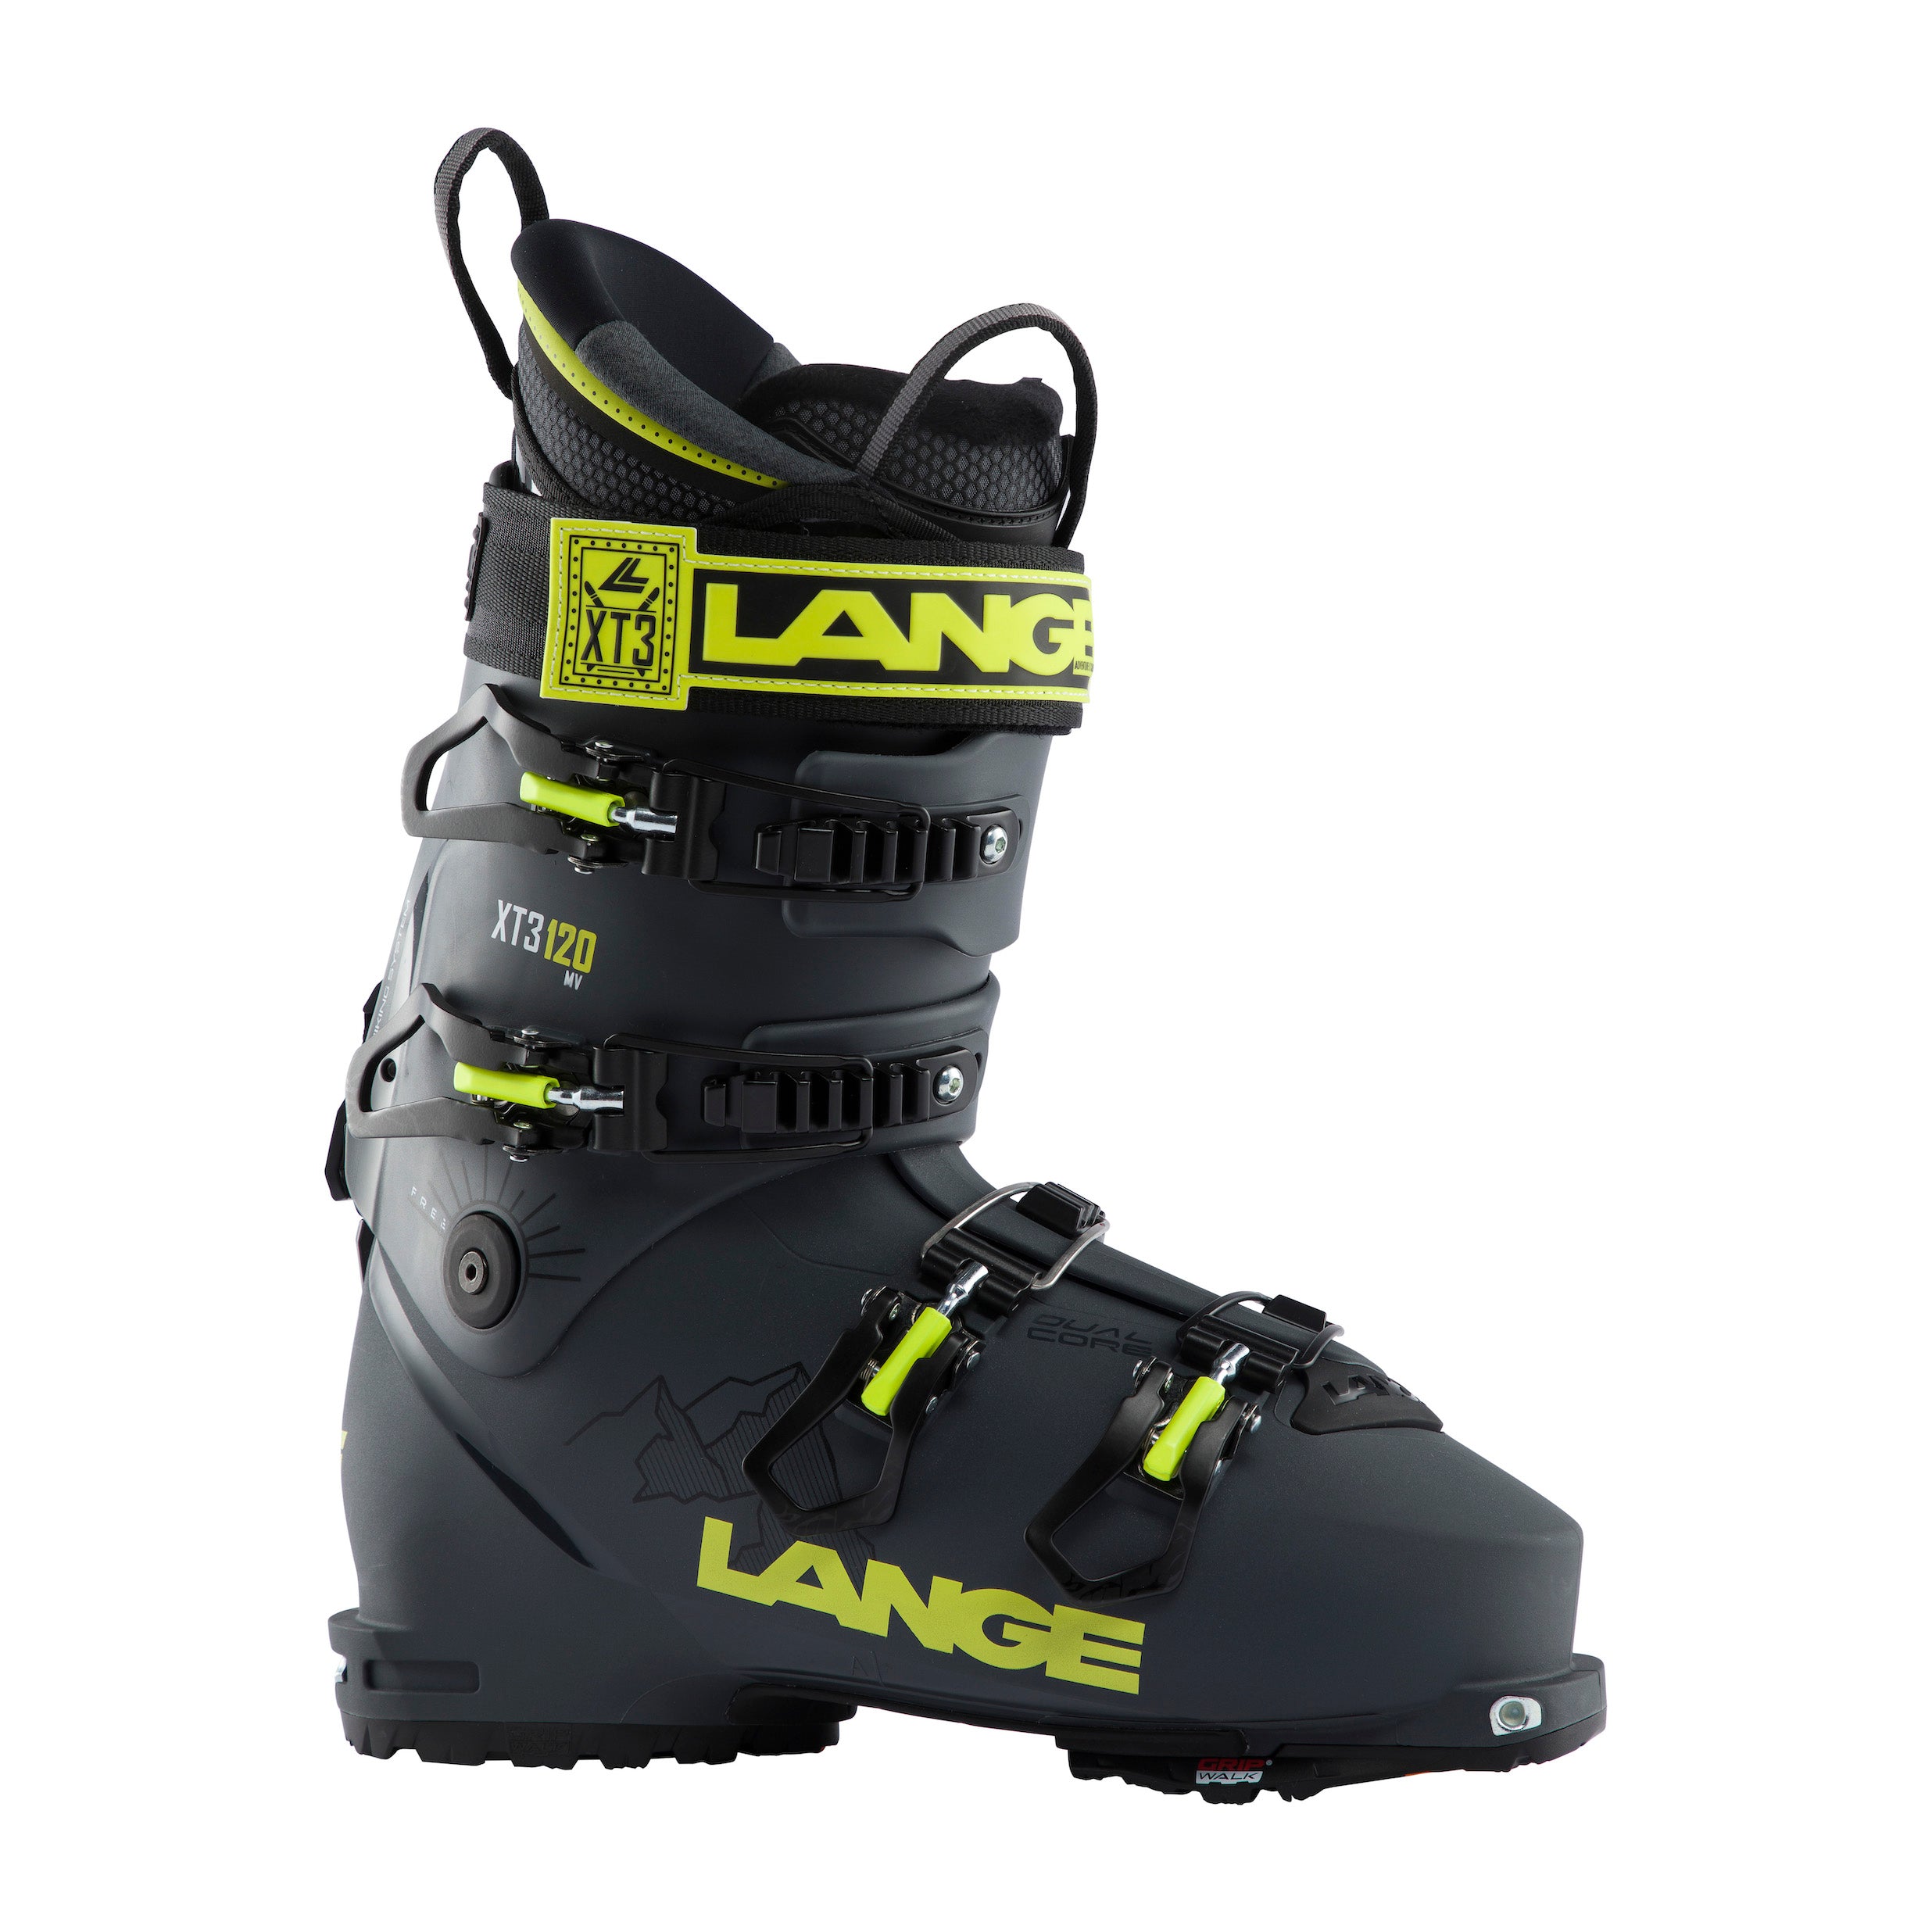 Men's Lange XT3 Free 120 MV ski boot, dark grey with neon green accents and mountain graphic designs.